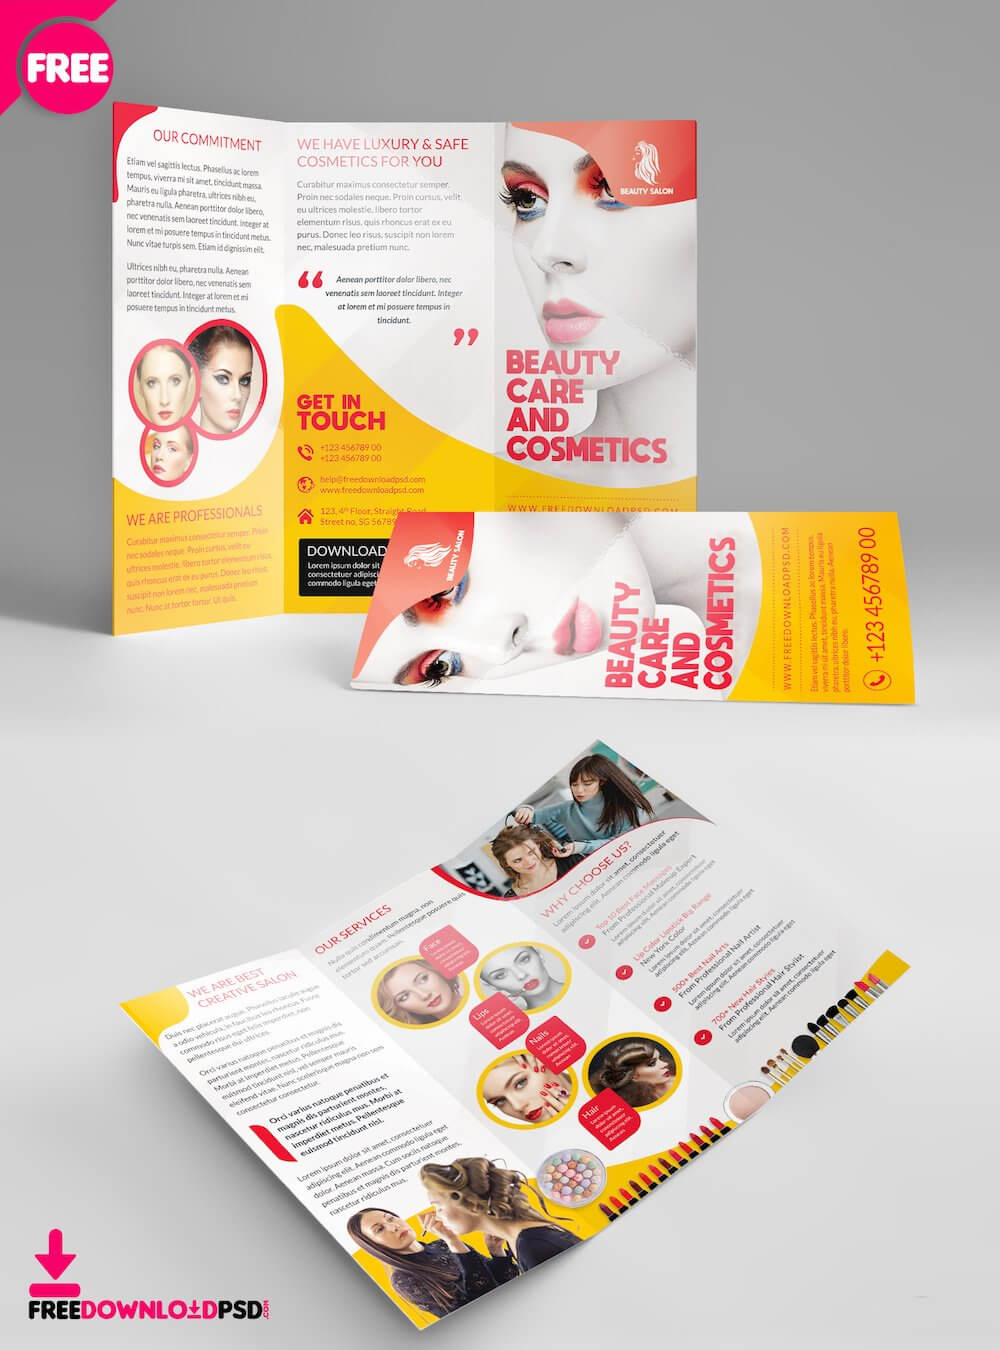 34 Best Free Brochure Mockups & Psd Templates 2019 – Colorlib Pertaining To Single Page Brochure Templates Psd